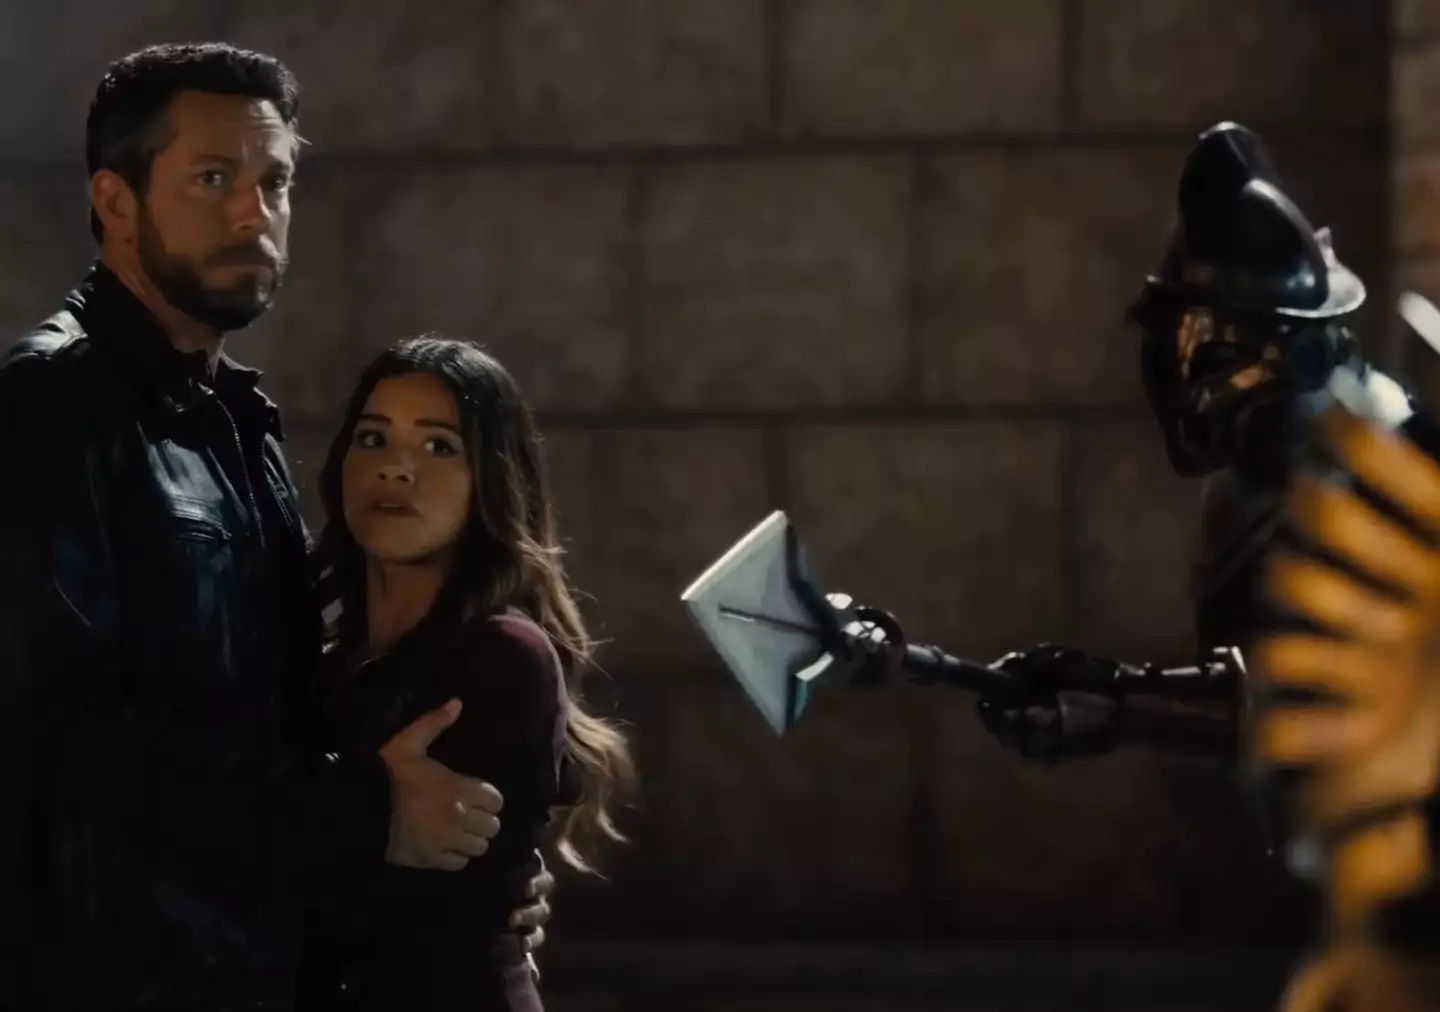 Zachary Levi and Gina Rodriguez stars as the parents in the new Spy Kids film.